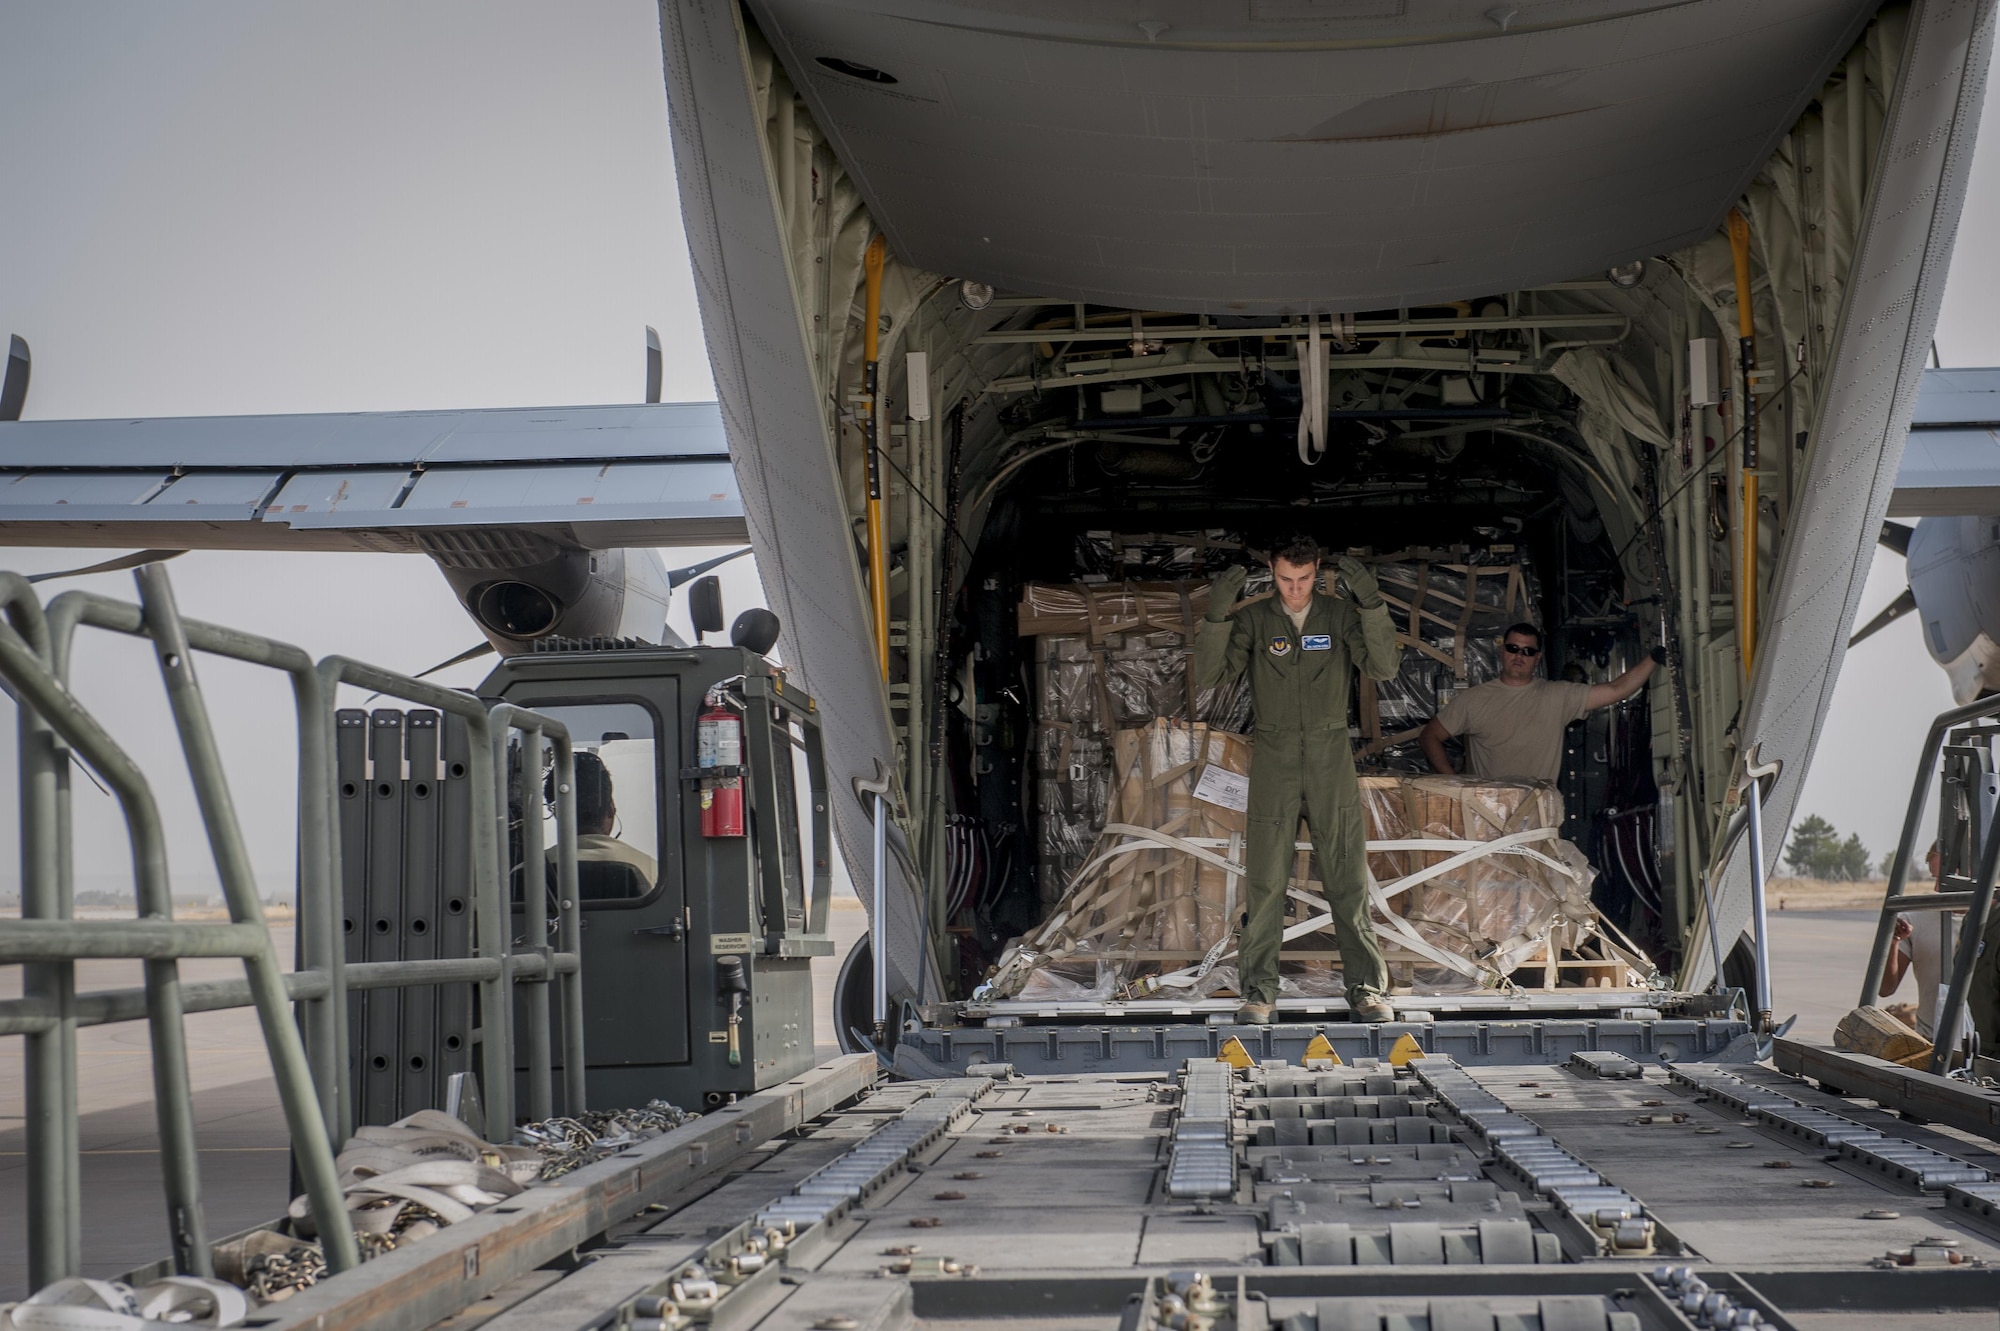 Senior Airman Dustin Dixon, a 435th Contingency Response Squadron loadmaster, directs an aircraft loader during a C-130J Super Hercules off-load of equipment Sept. 12, 2015, at Diyarbakir Air Base, Turkey. Airmen from the 435th Contingency Response Group received more than 680 tons of equipment for base operations in support of the U.S. Air Force’s support personnel recovery mission from Turkey. When requested, coalition aircraft and personnel will provide recovery capability to protect and recover coalition members. (U.S. Air Force photo/Airman Cory W. Bush)